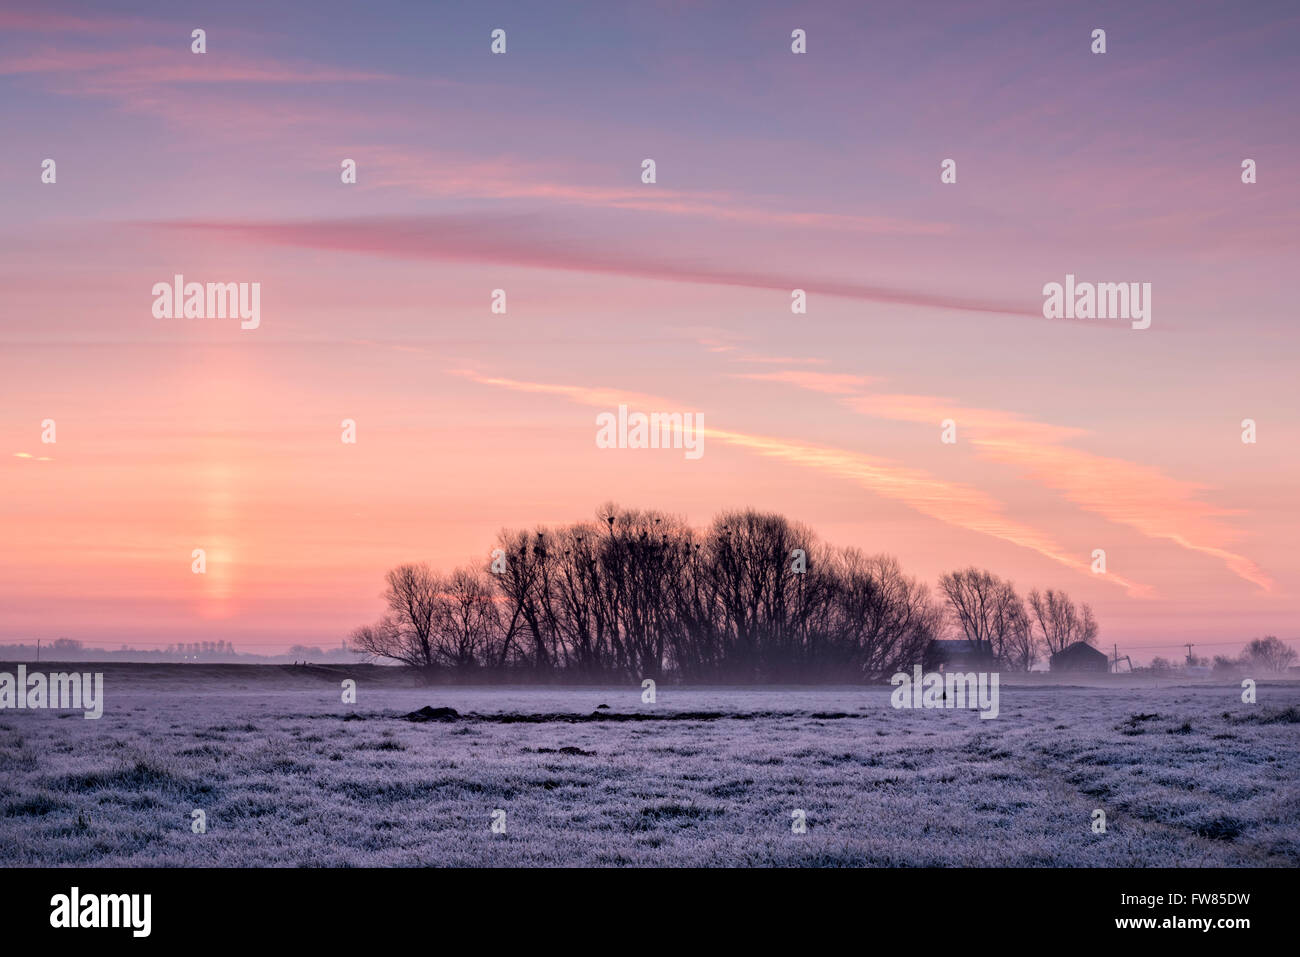 Willingham, Cambridgeshire, UK. 1st April, 2016. a cold, misty start to the day in the flat, fenland farmland at Willingham, Cambridgeshire UK. A clear sky led to an overnight frost. The weather is forecast to be warmer over the coming weekend. Credit:  Julian Eales/Alamy Live News Stock Photo